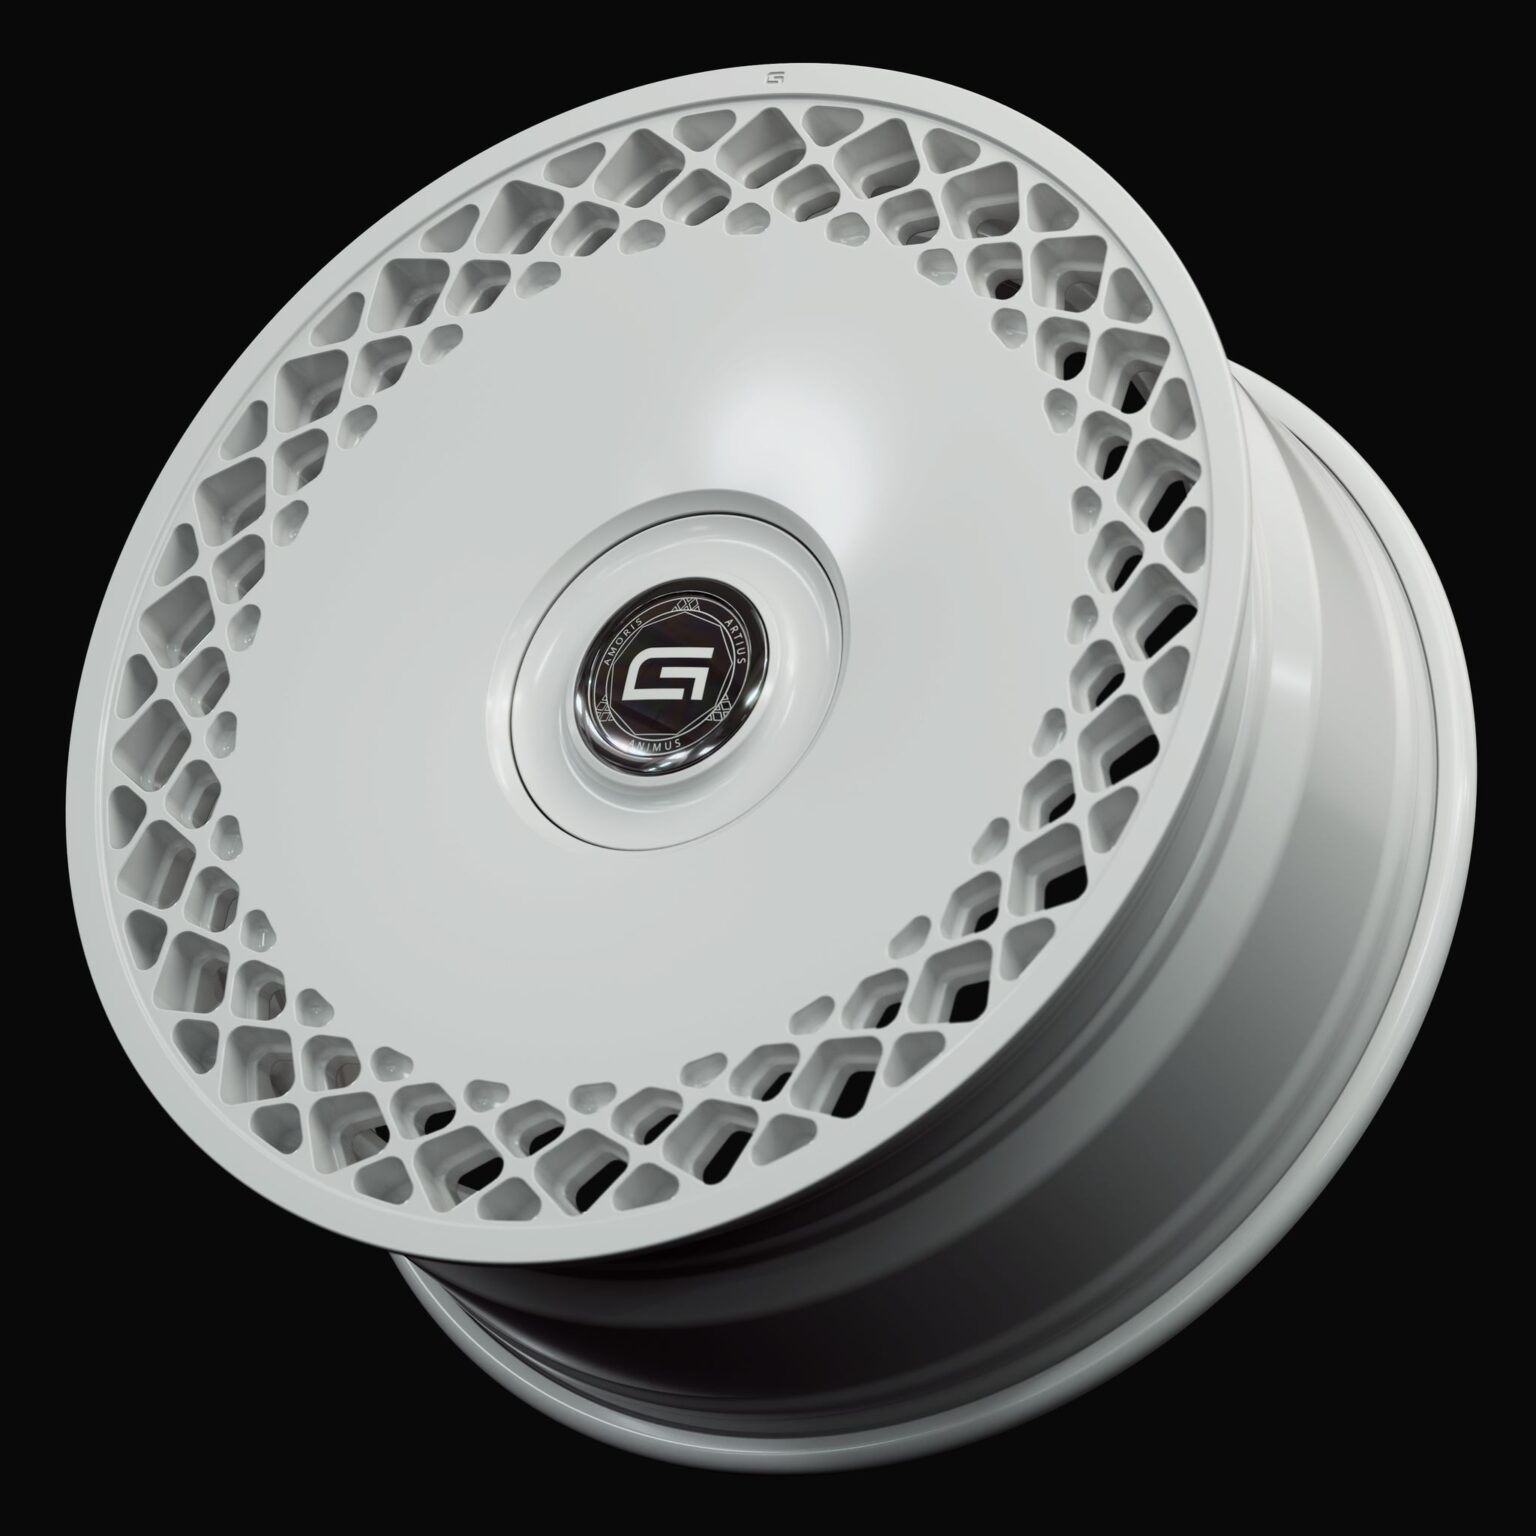 Three-quarter view of a white G600 duoblock wheel from Govad Forged Luxury series